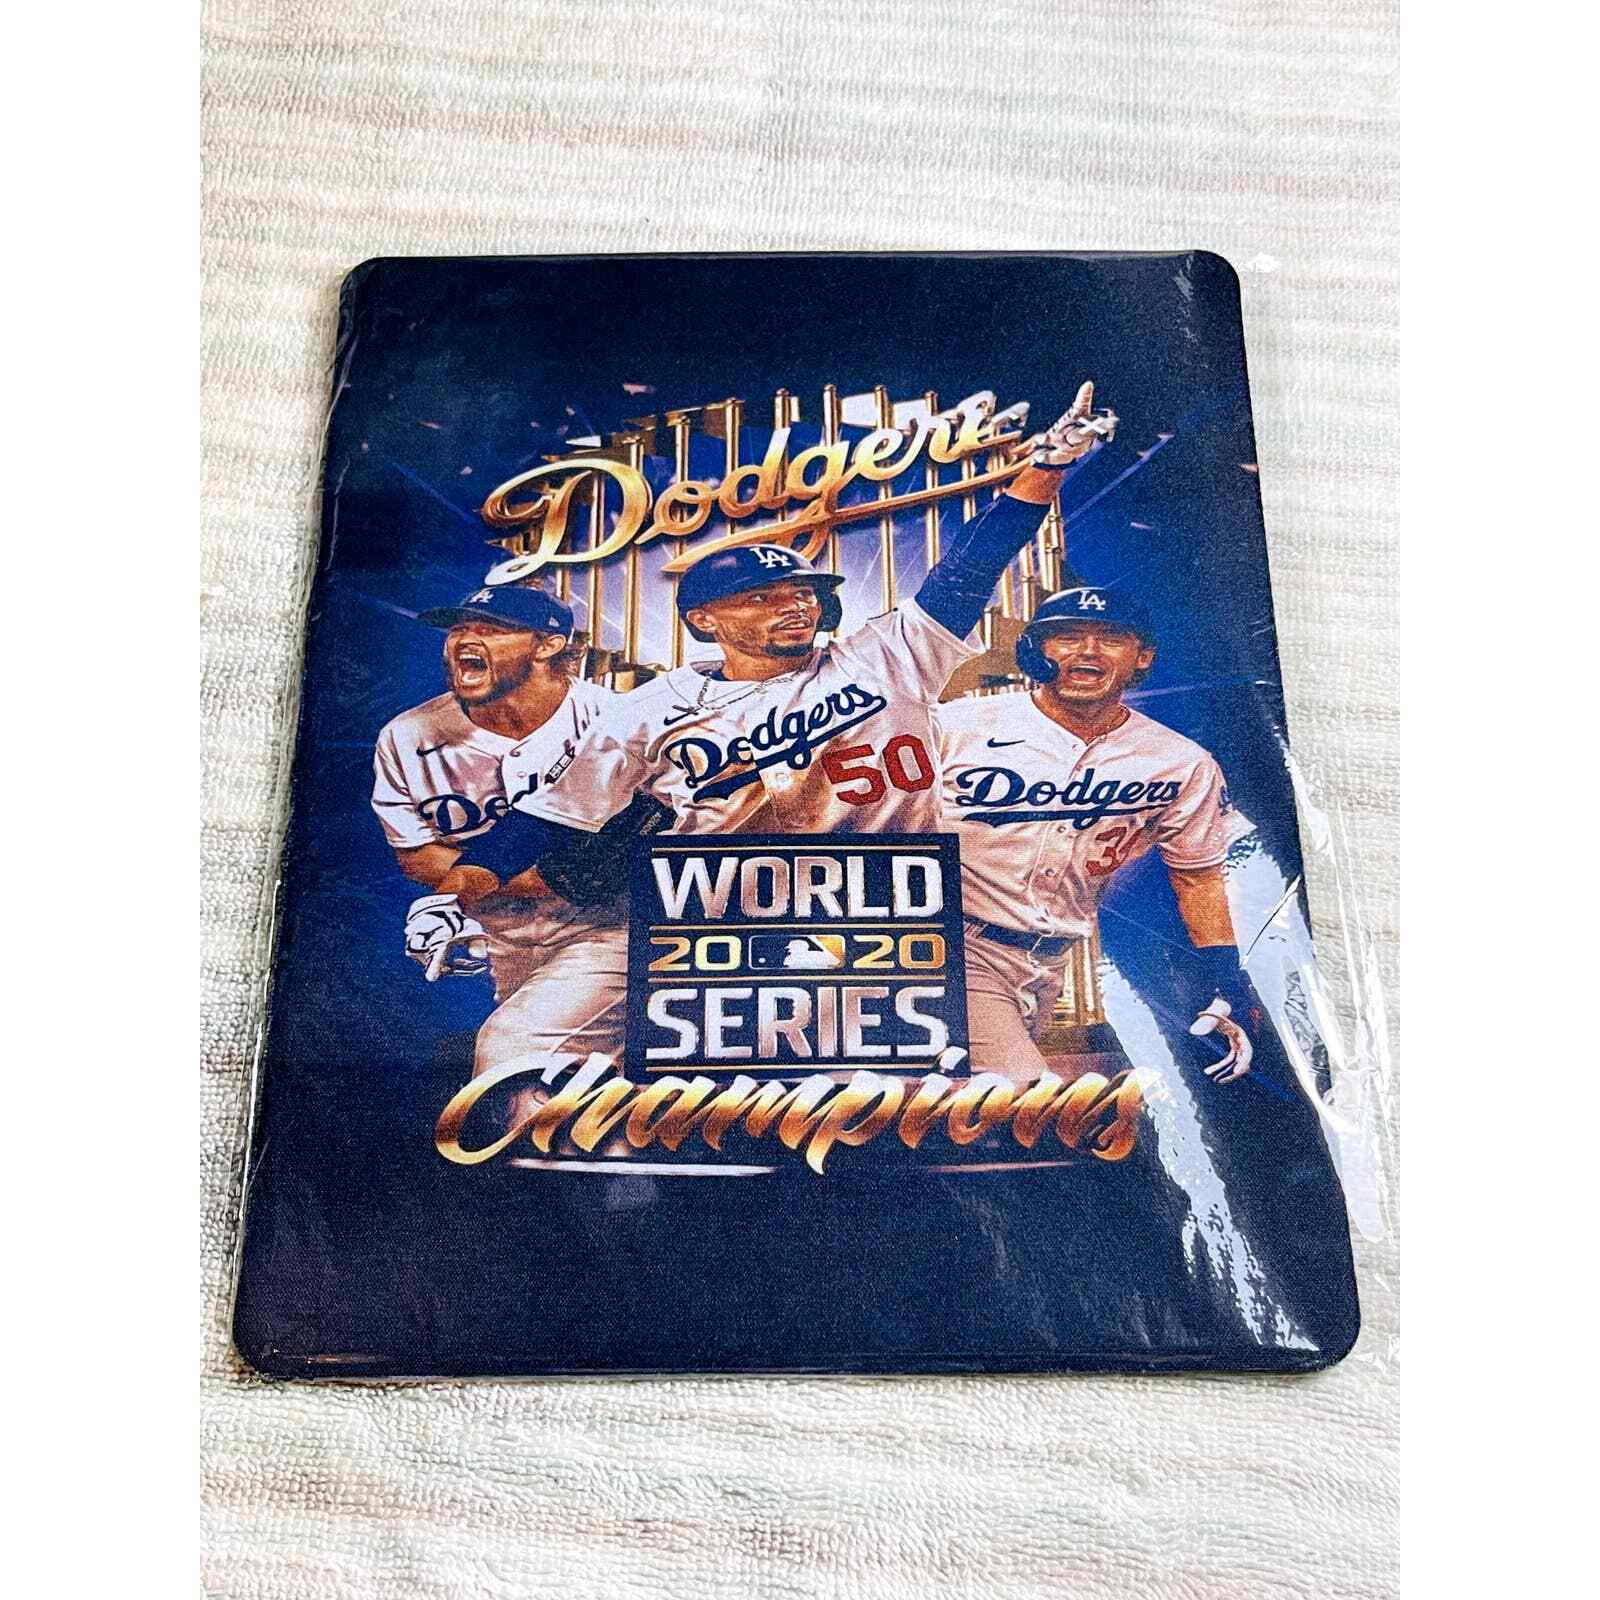 New Los Angeles Dodgers WS Champions Mouse Pad 9.5x8